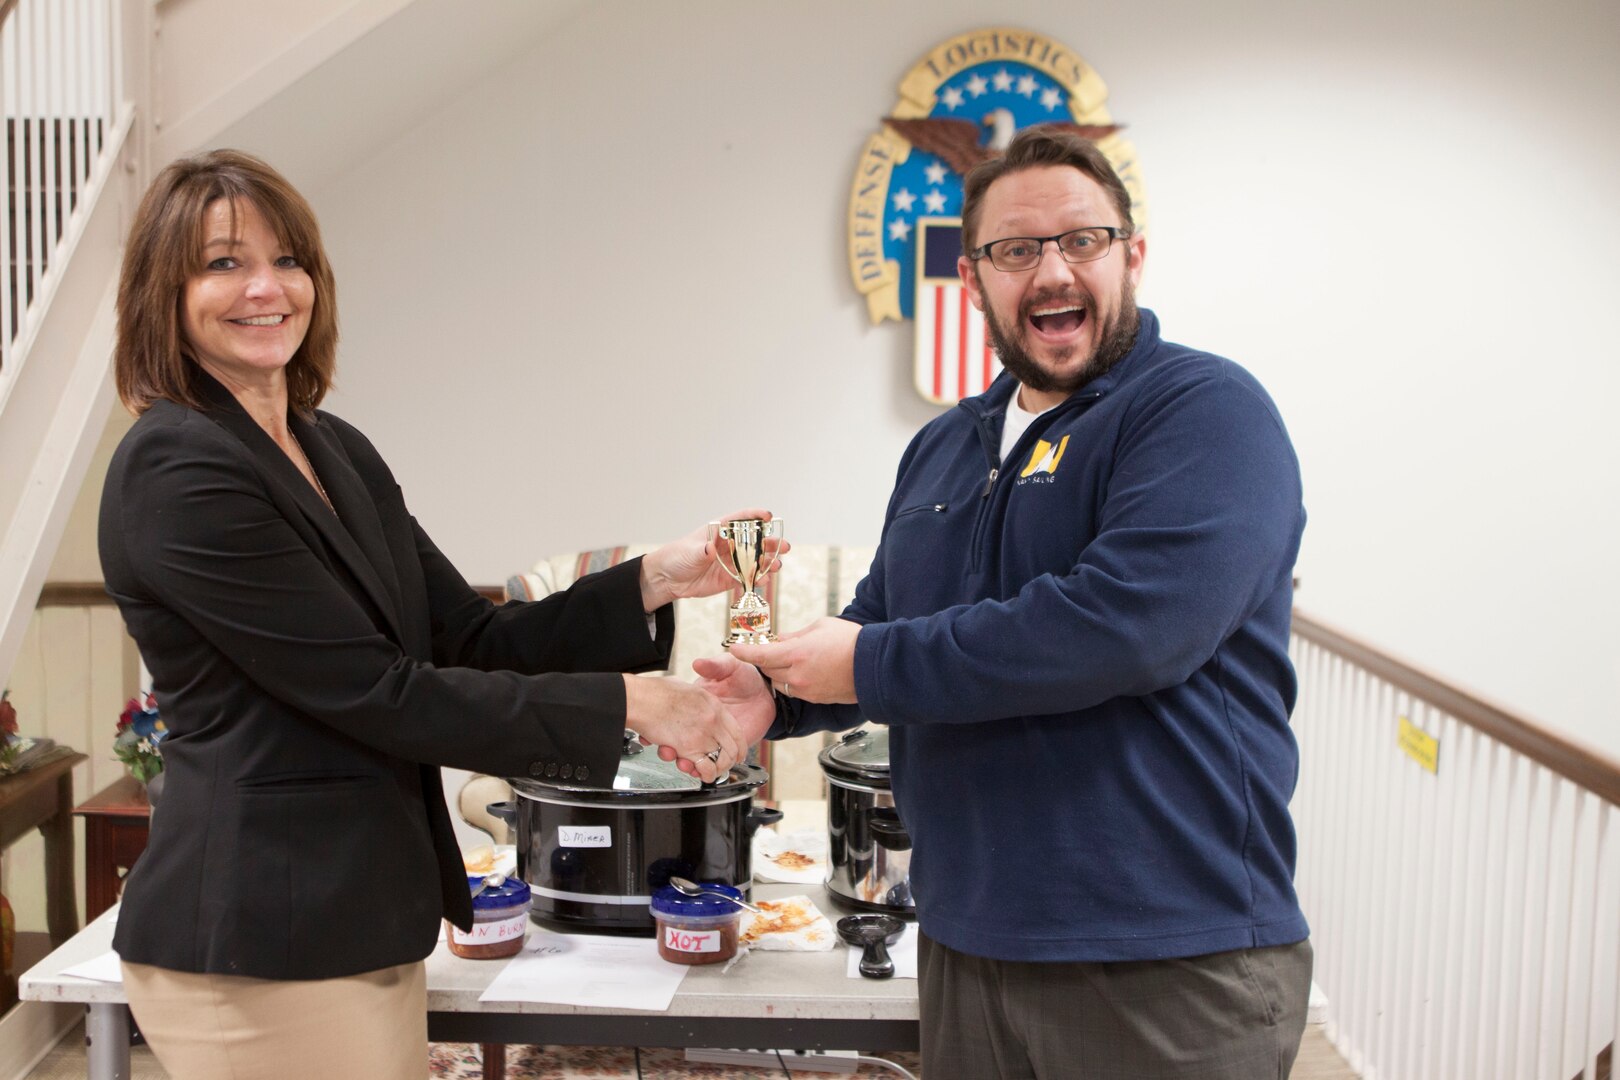 Dawn Bonsell, DLA Distribution Public Affairs Officer, presents Matt Williams, DLA Future Plans, with his trophy for “people’s choice.”